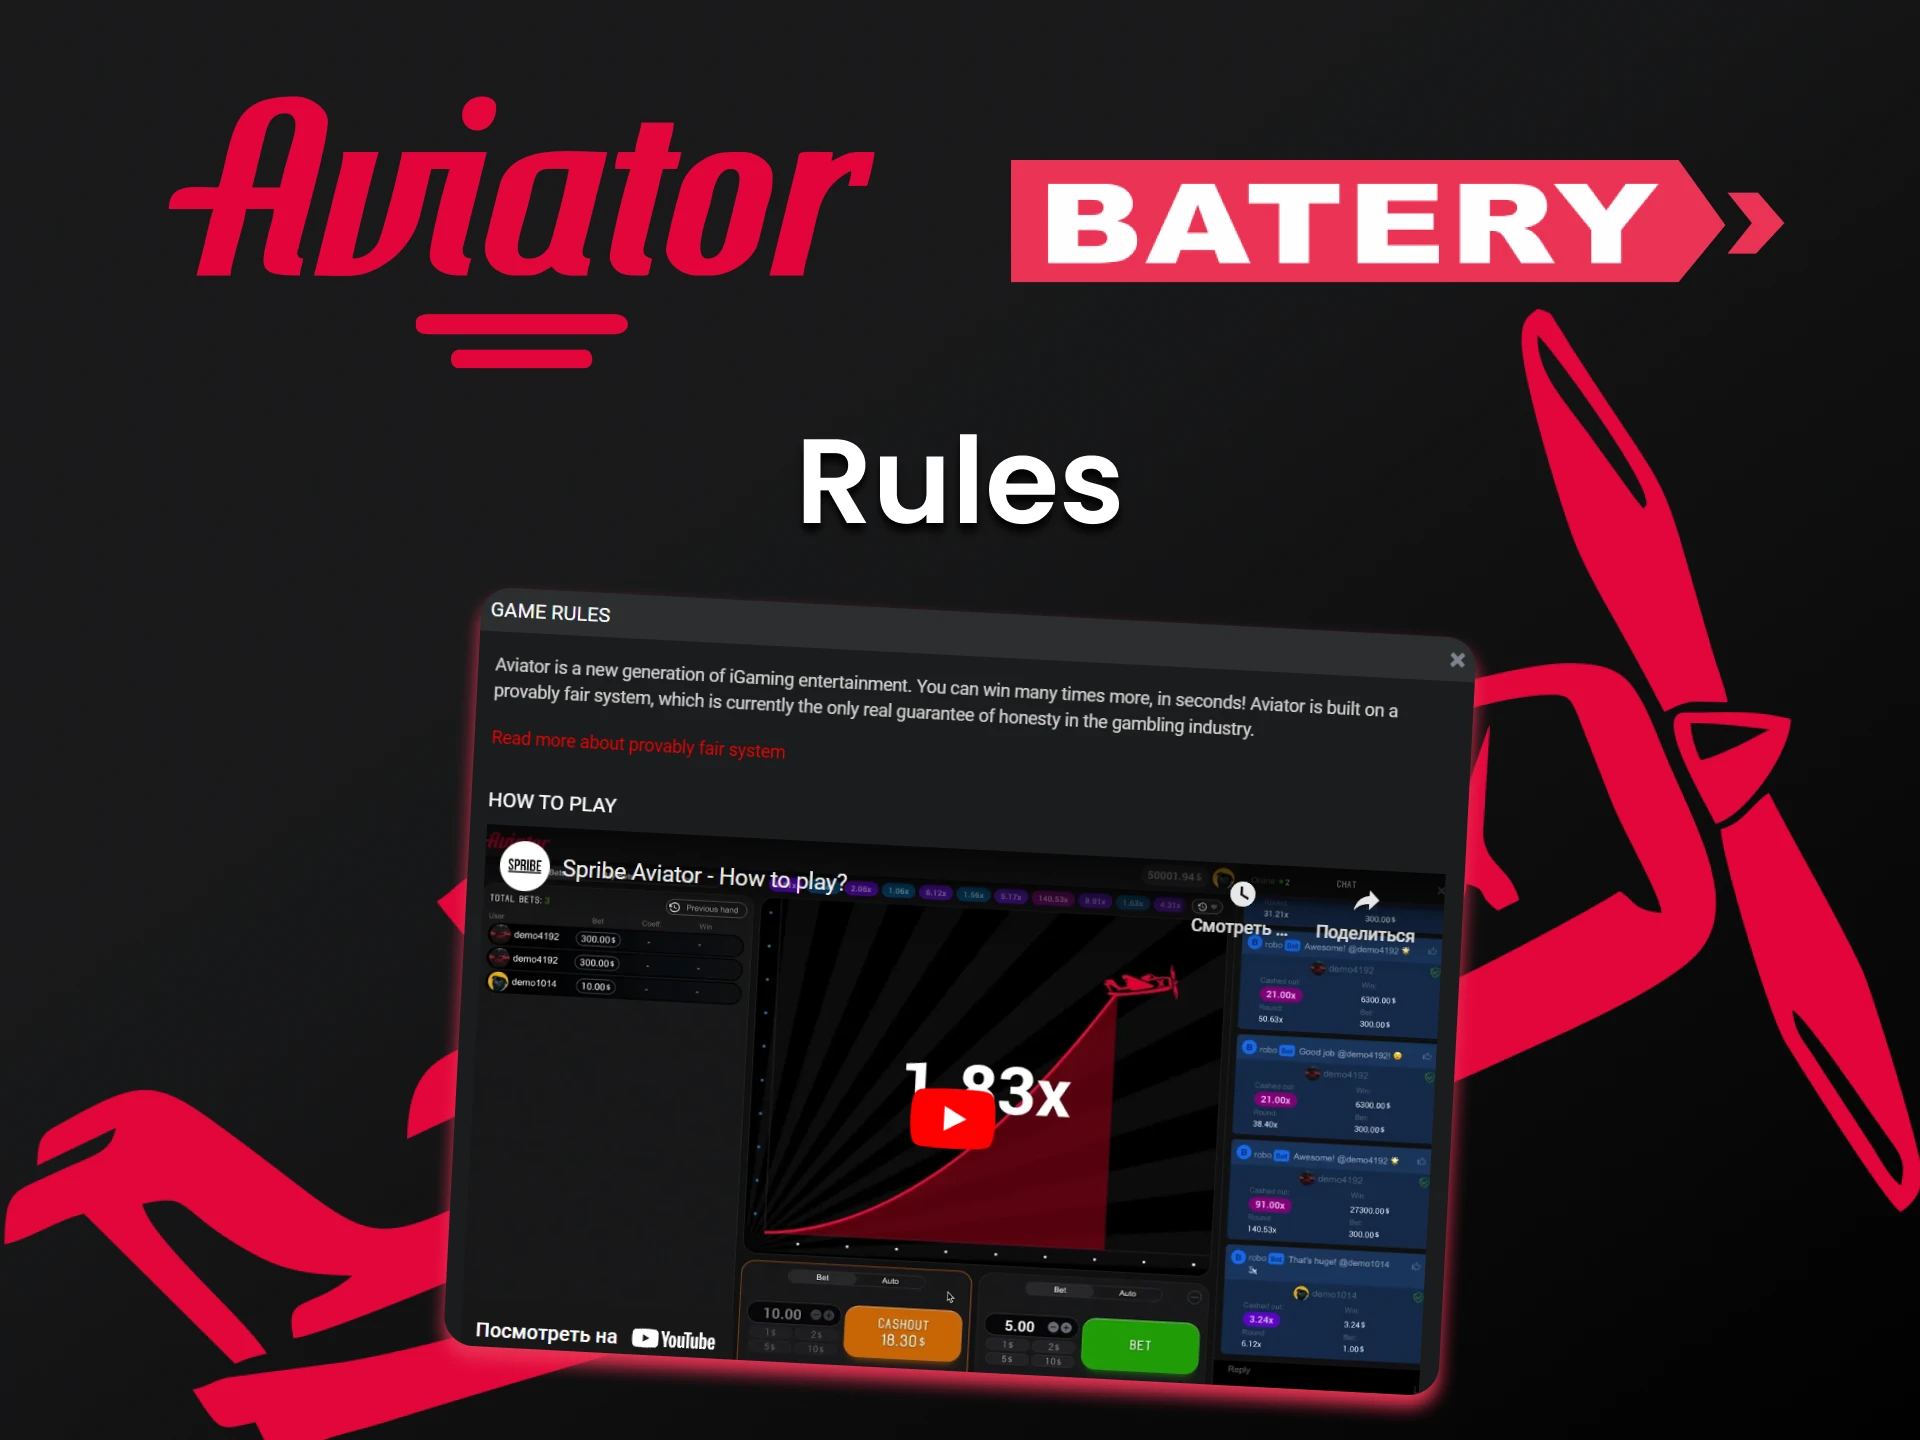 Learn the rules of playing Aviator on Batery.